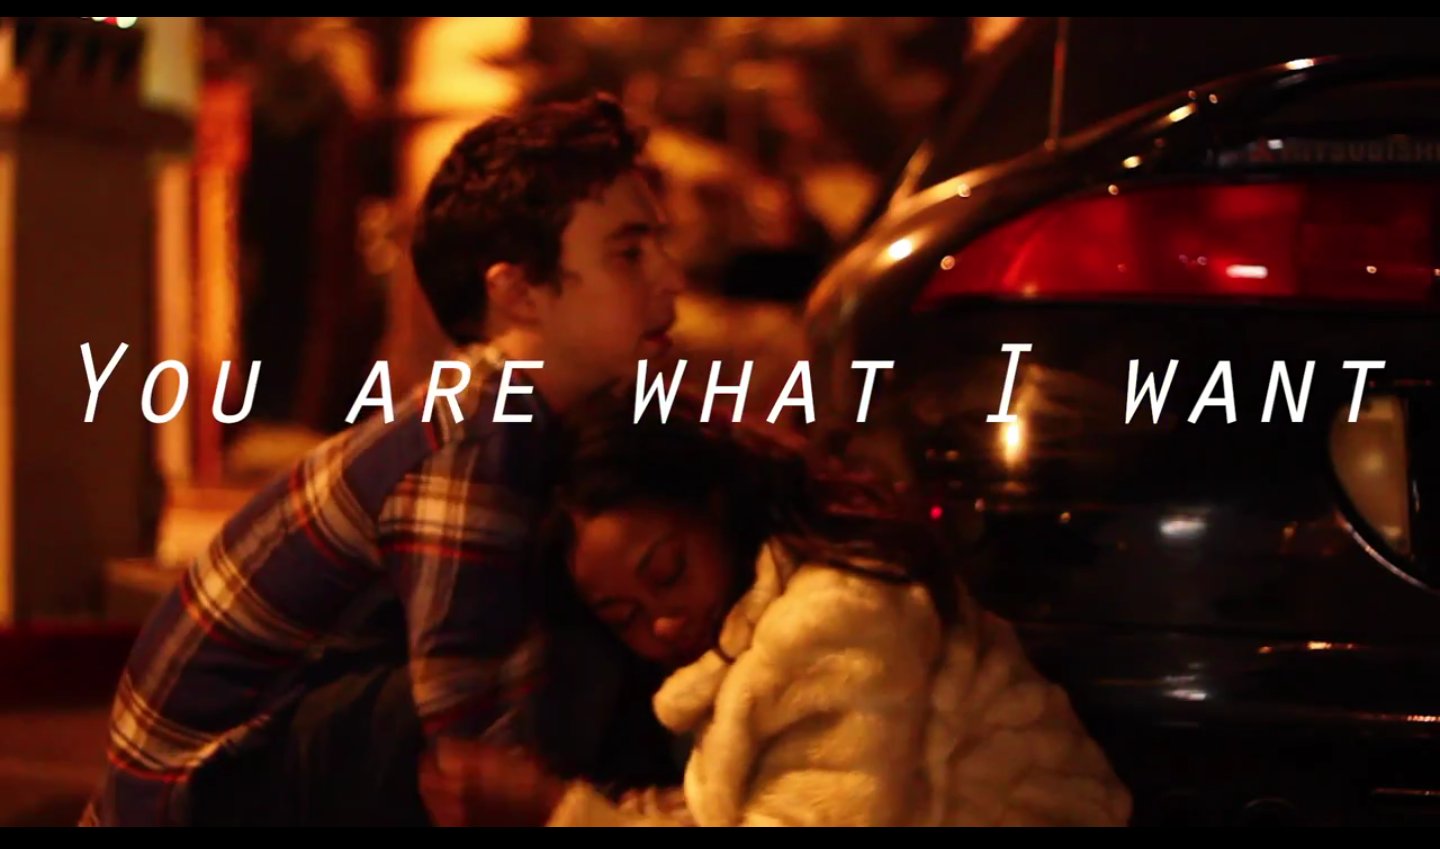 Production still from YOU ARE WHAT I WANT, Produced by Daniele Watts.